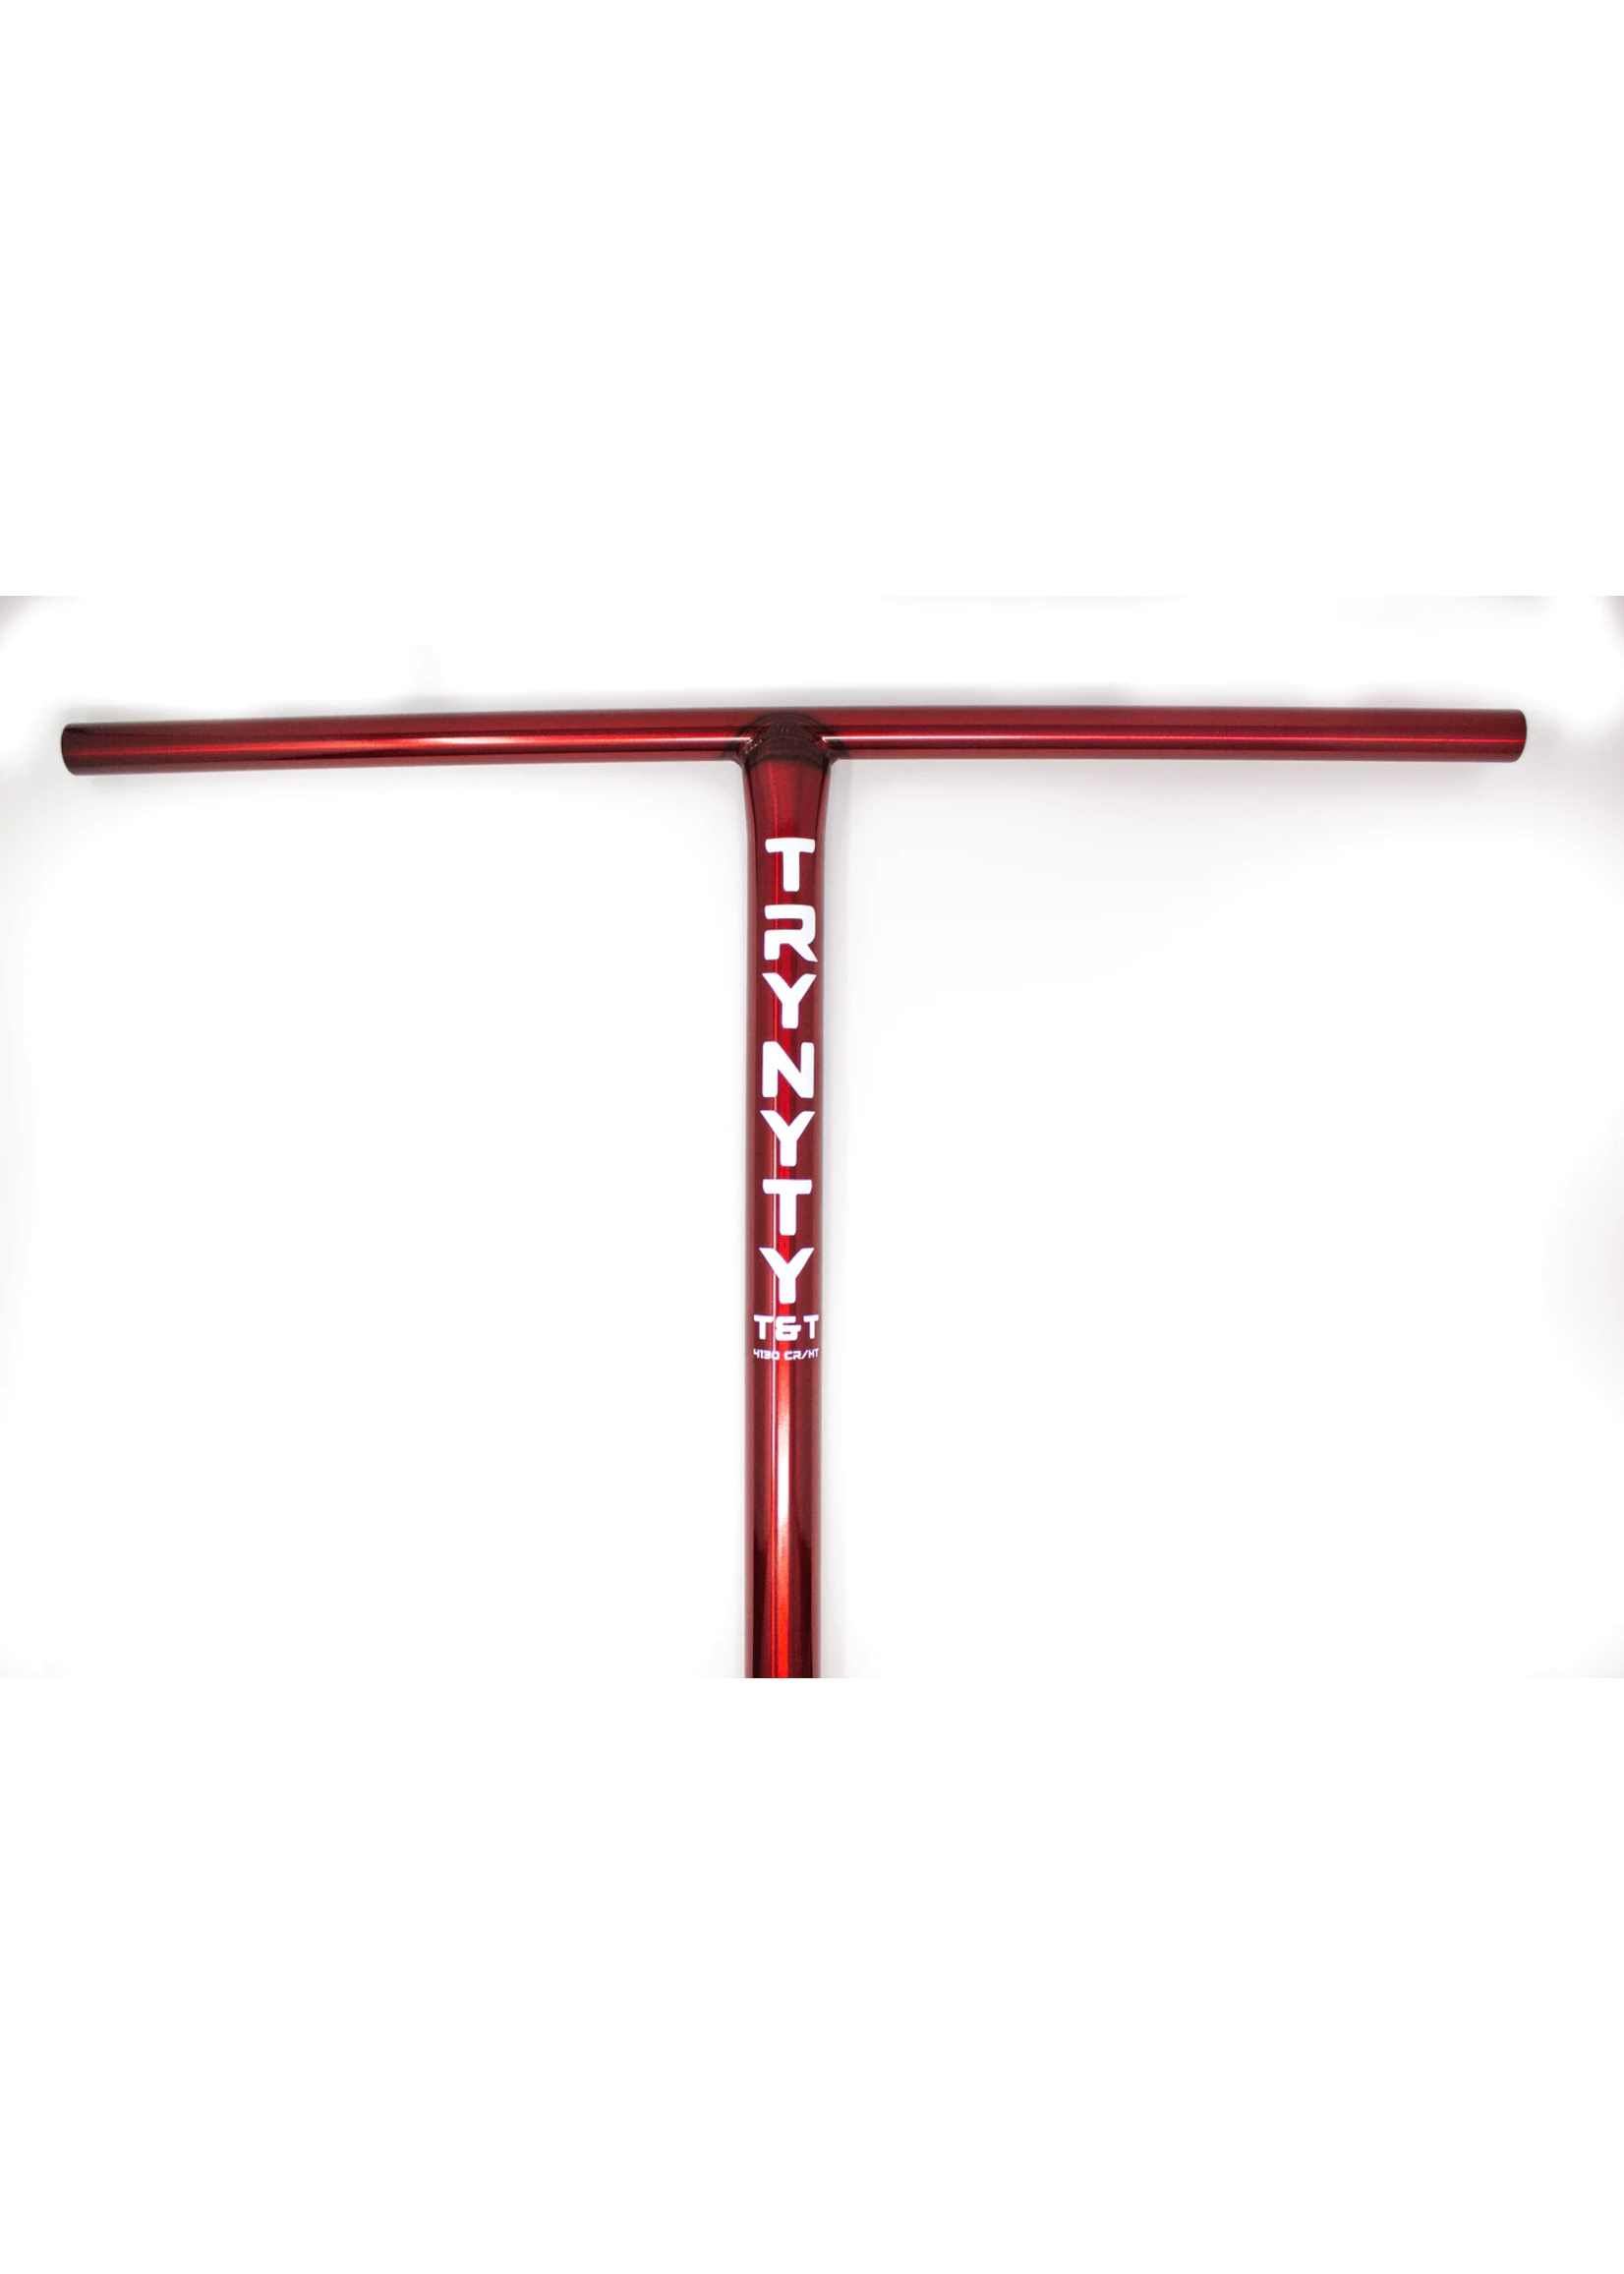 Trynyty Trynyty - T&T Tbars - Standard